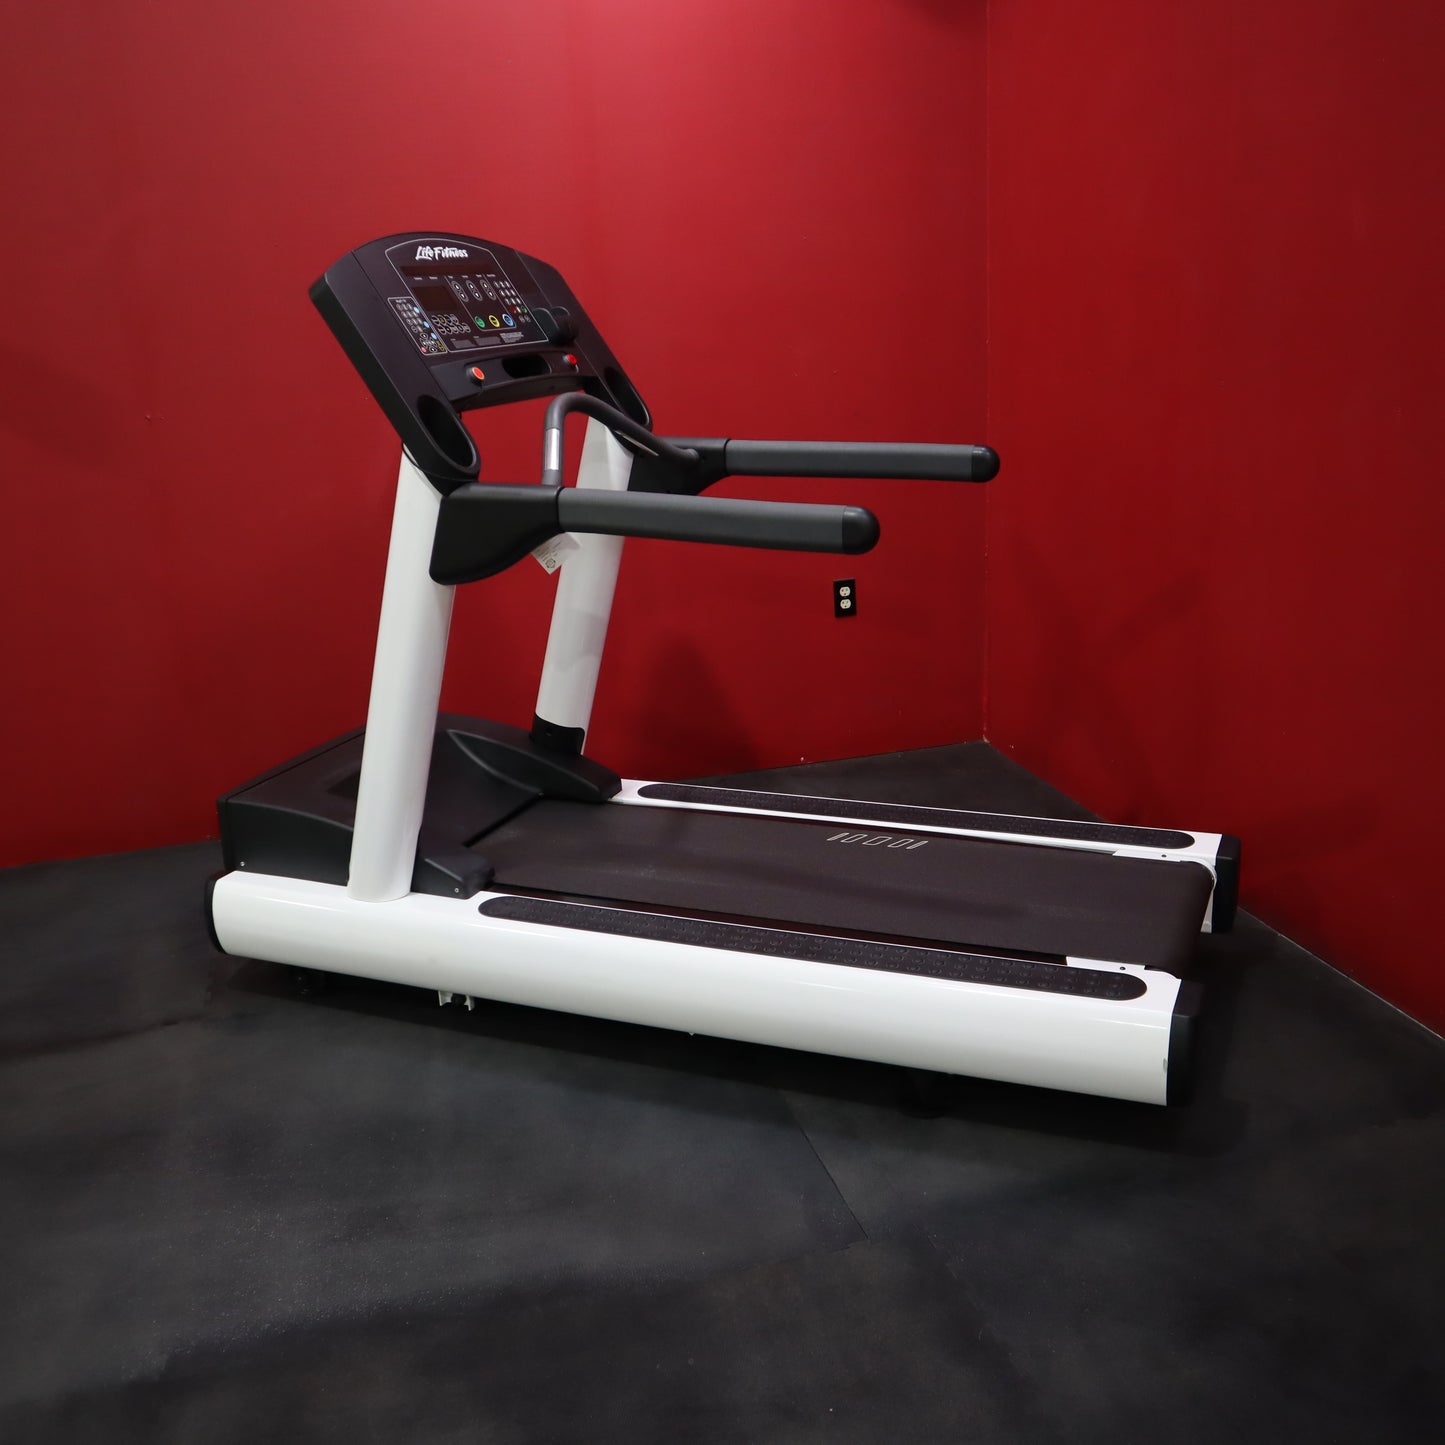 Life Fitness Integrity Series Treadmill CLST (Refurbished)